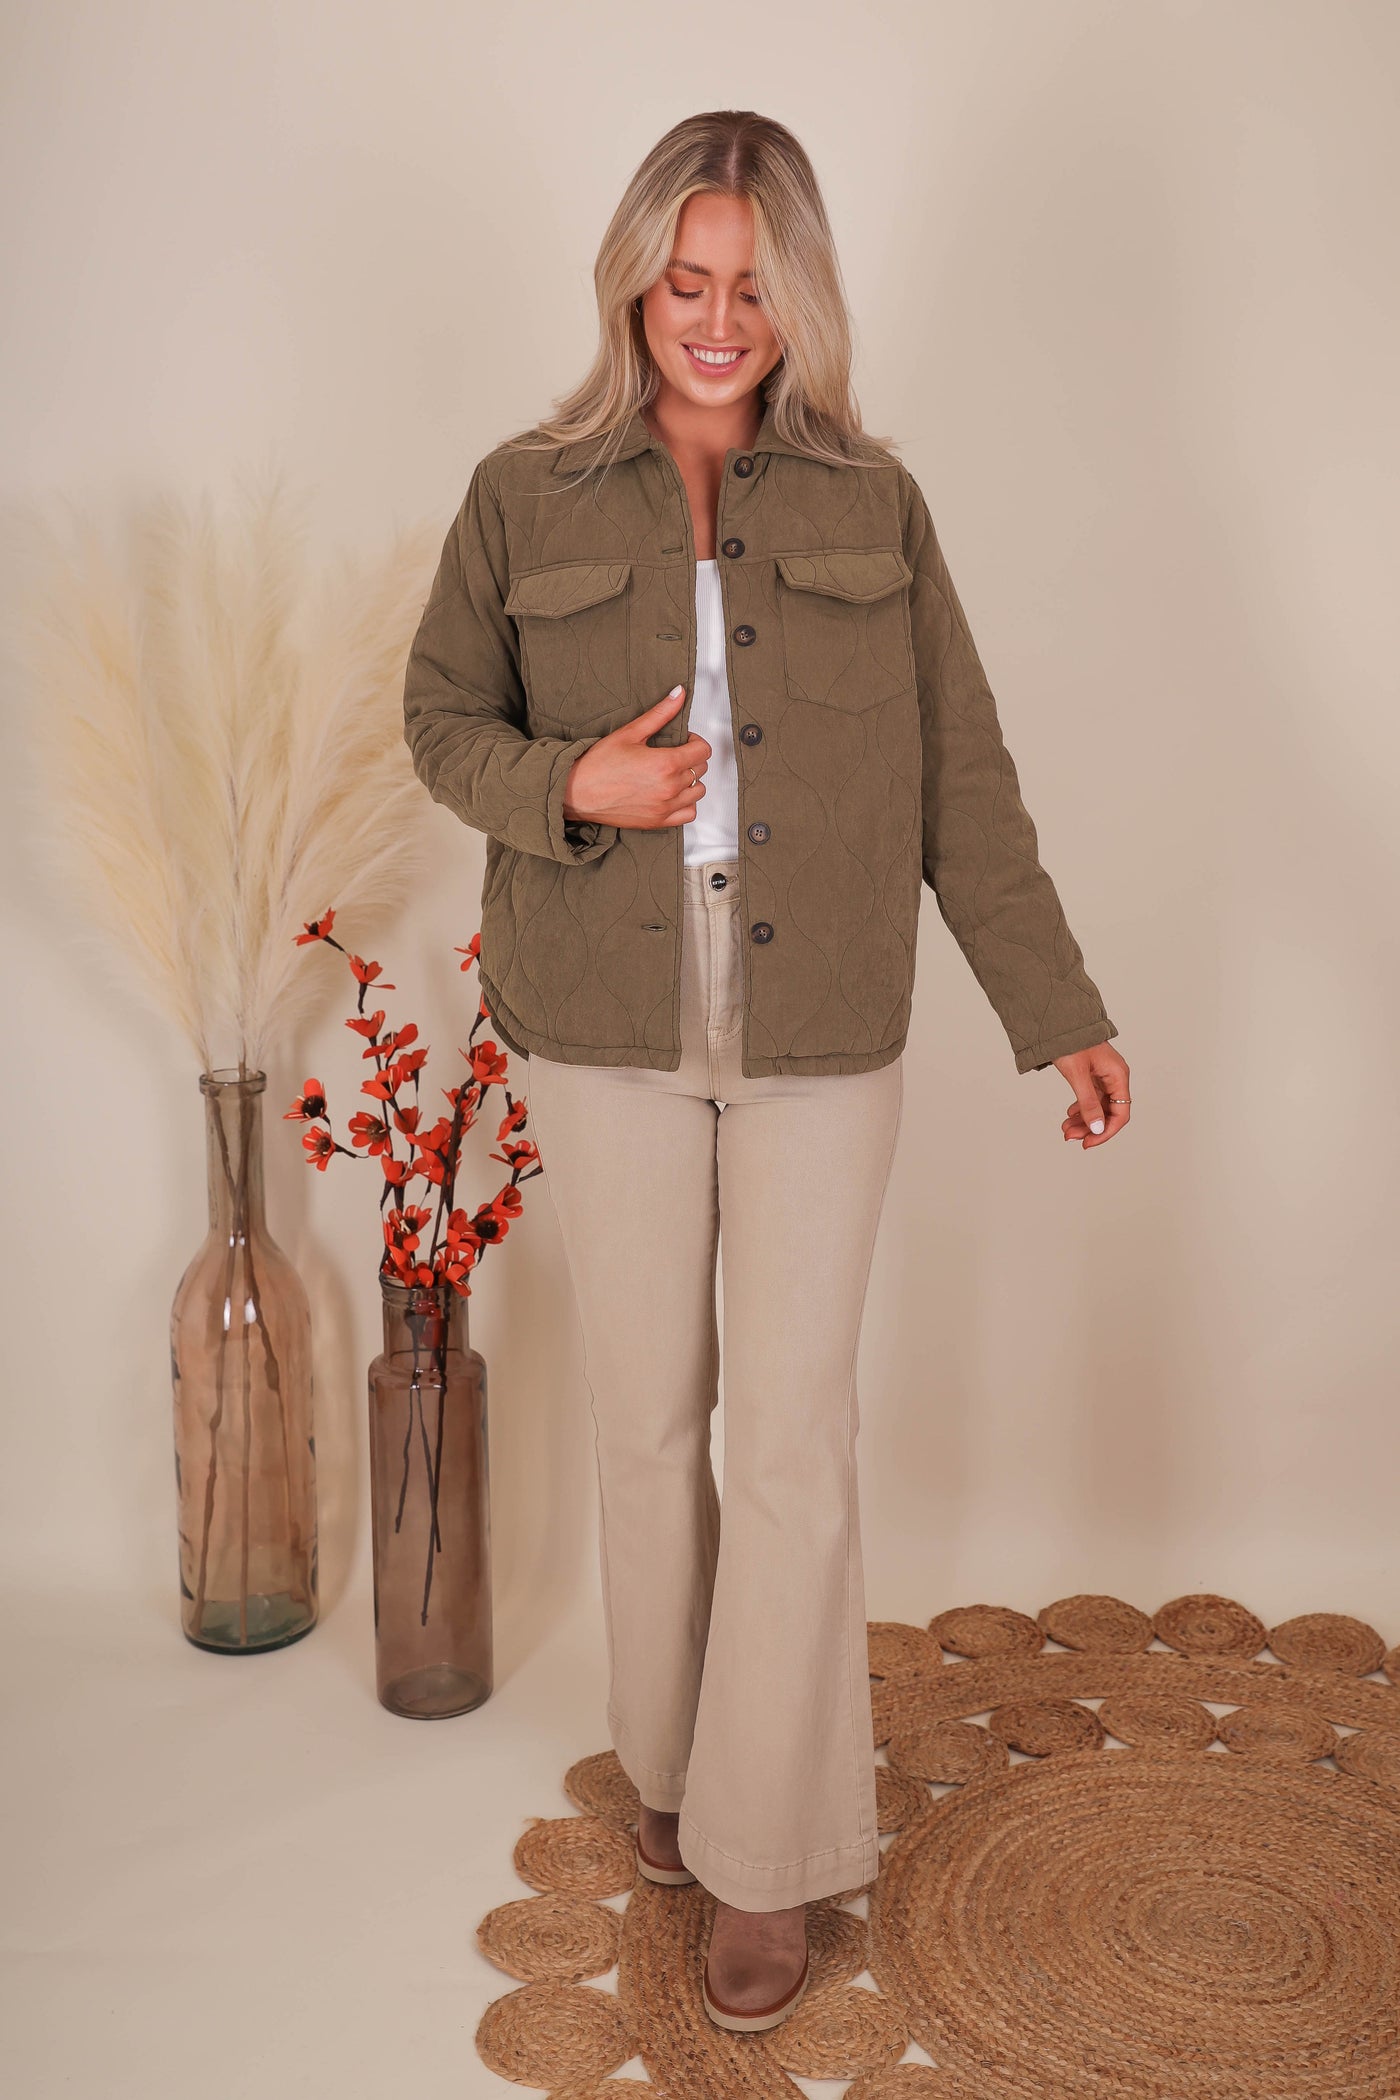 Olive Quilted Jacket- Women's Classic Quilted Jacket- Adora Jacket